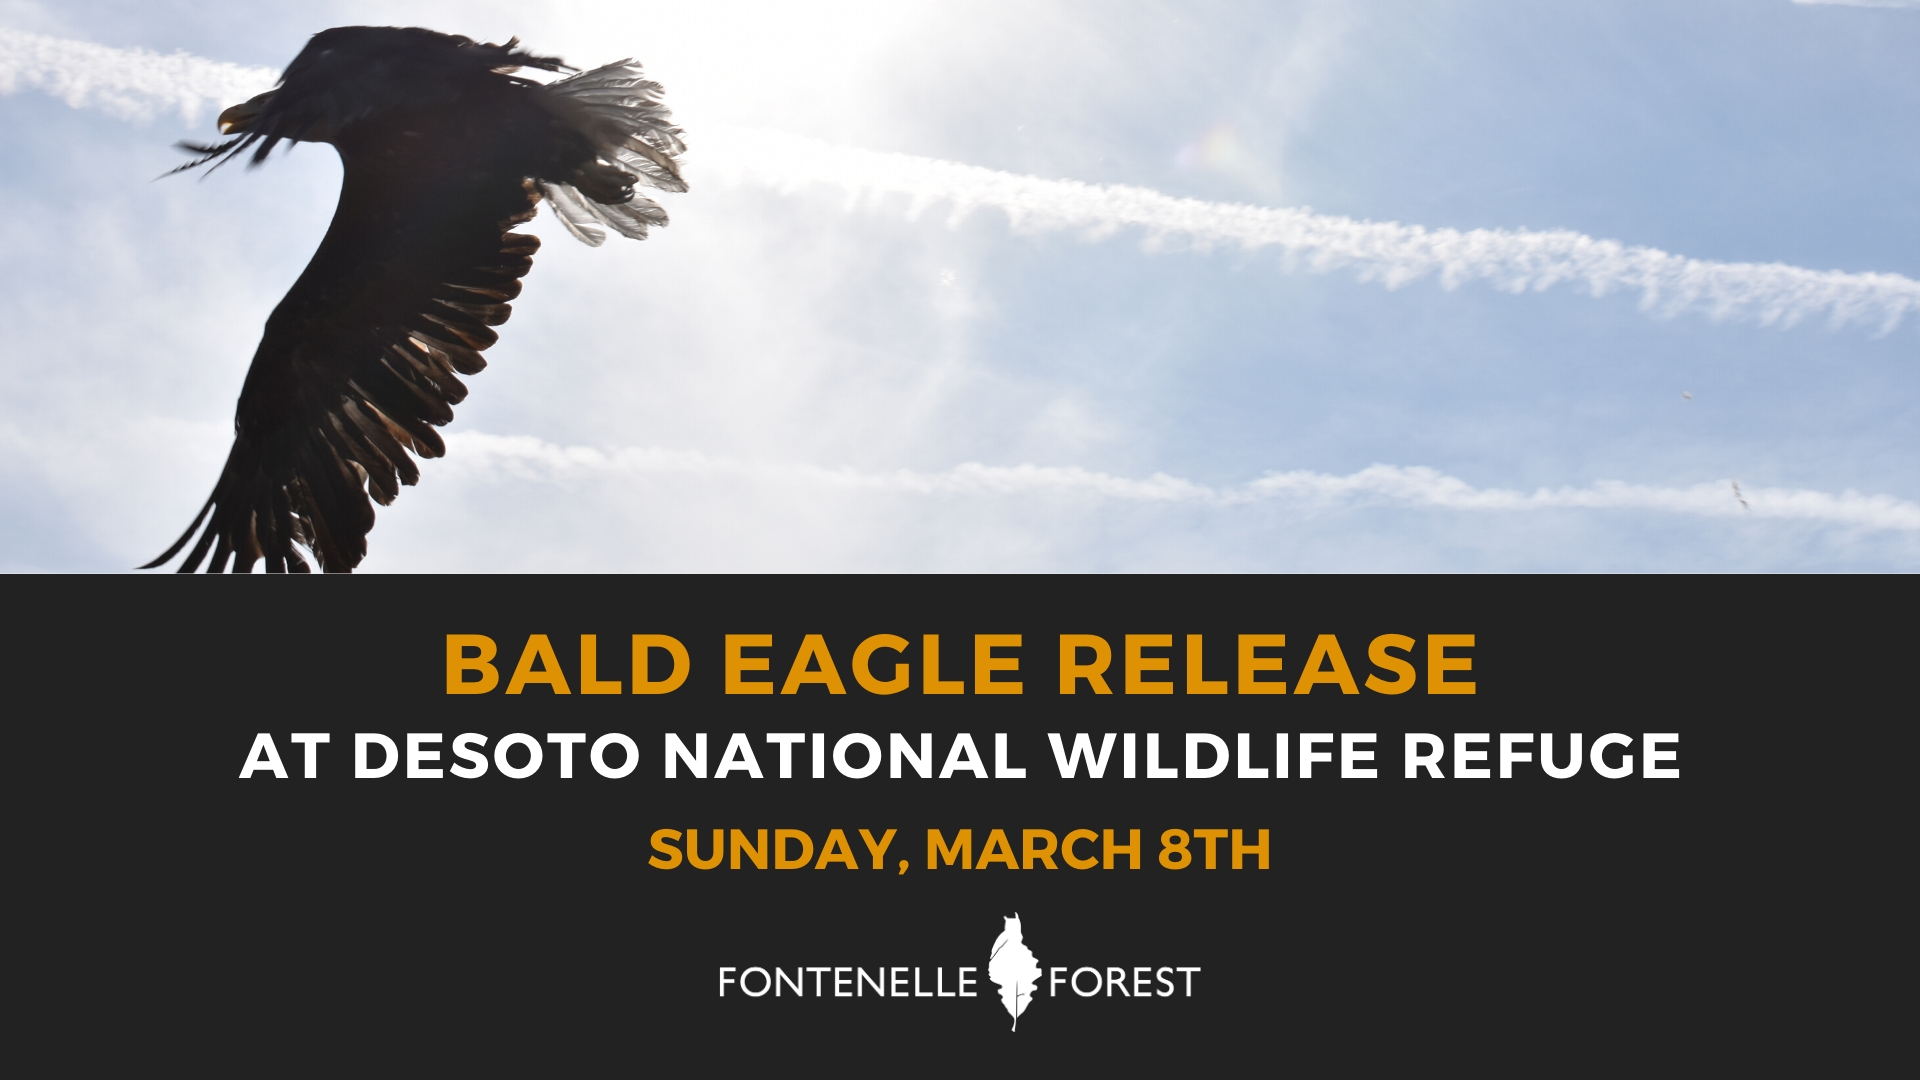 a picture of a large bird flying in the sky. It has a black footer that says, "BALD EAGLE RELEASE AT DESOTO NATIONAL WILDLIFE REFUGE SUNDAY, MARCH 8TH" then it has the Fontenelle Forest logo in white.